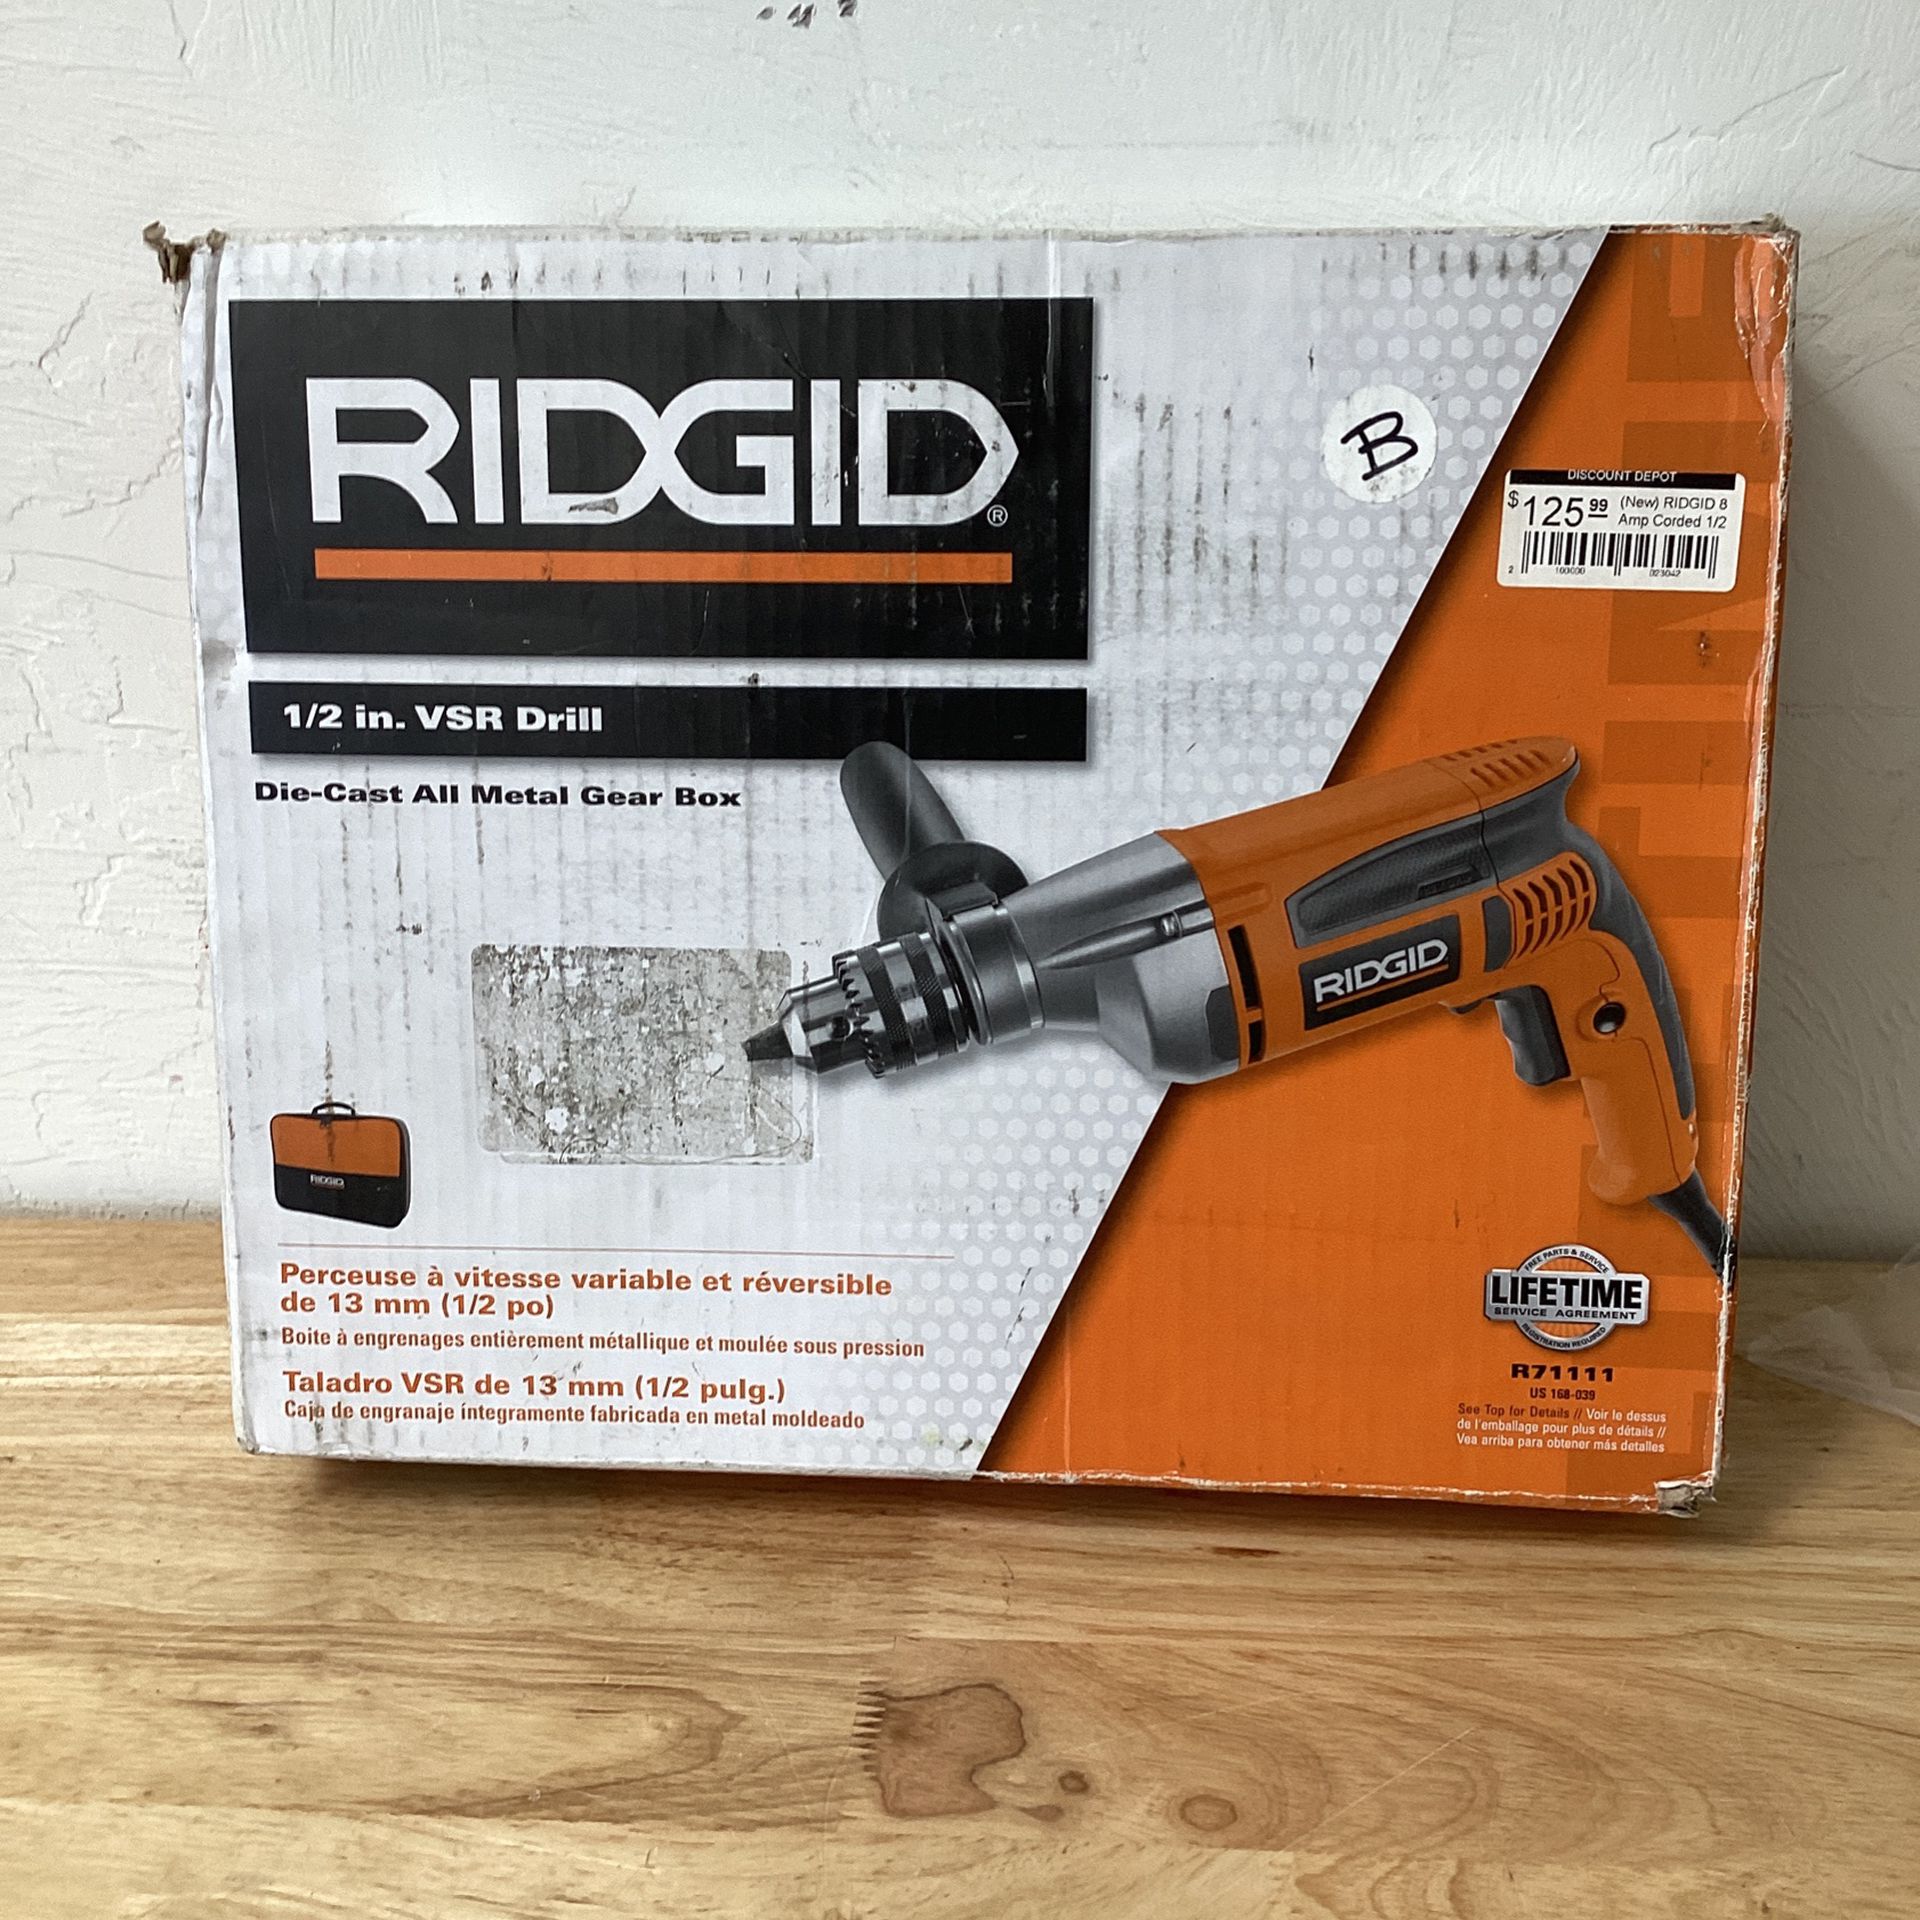 (New) RIDGID 8 Amp Corded 1/2 in. Heavy-Duty Variable Speed Reversible Drill